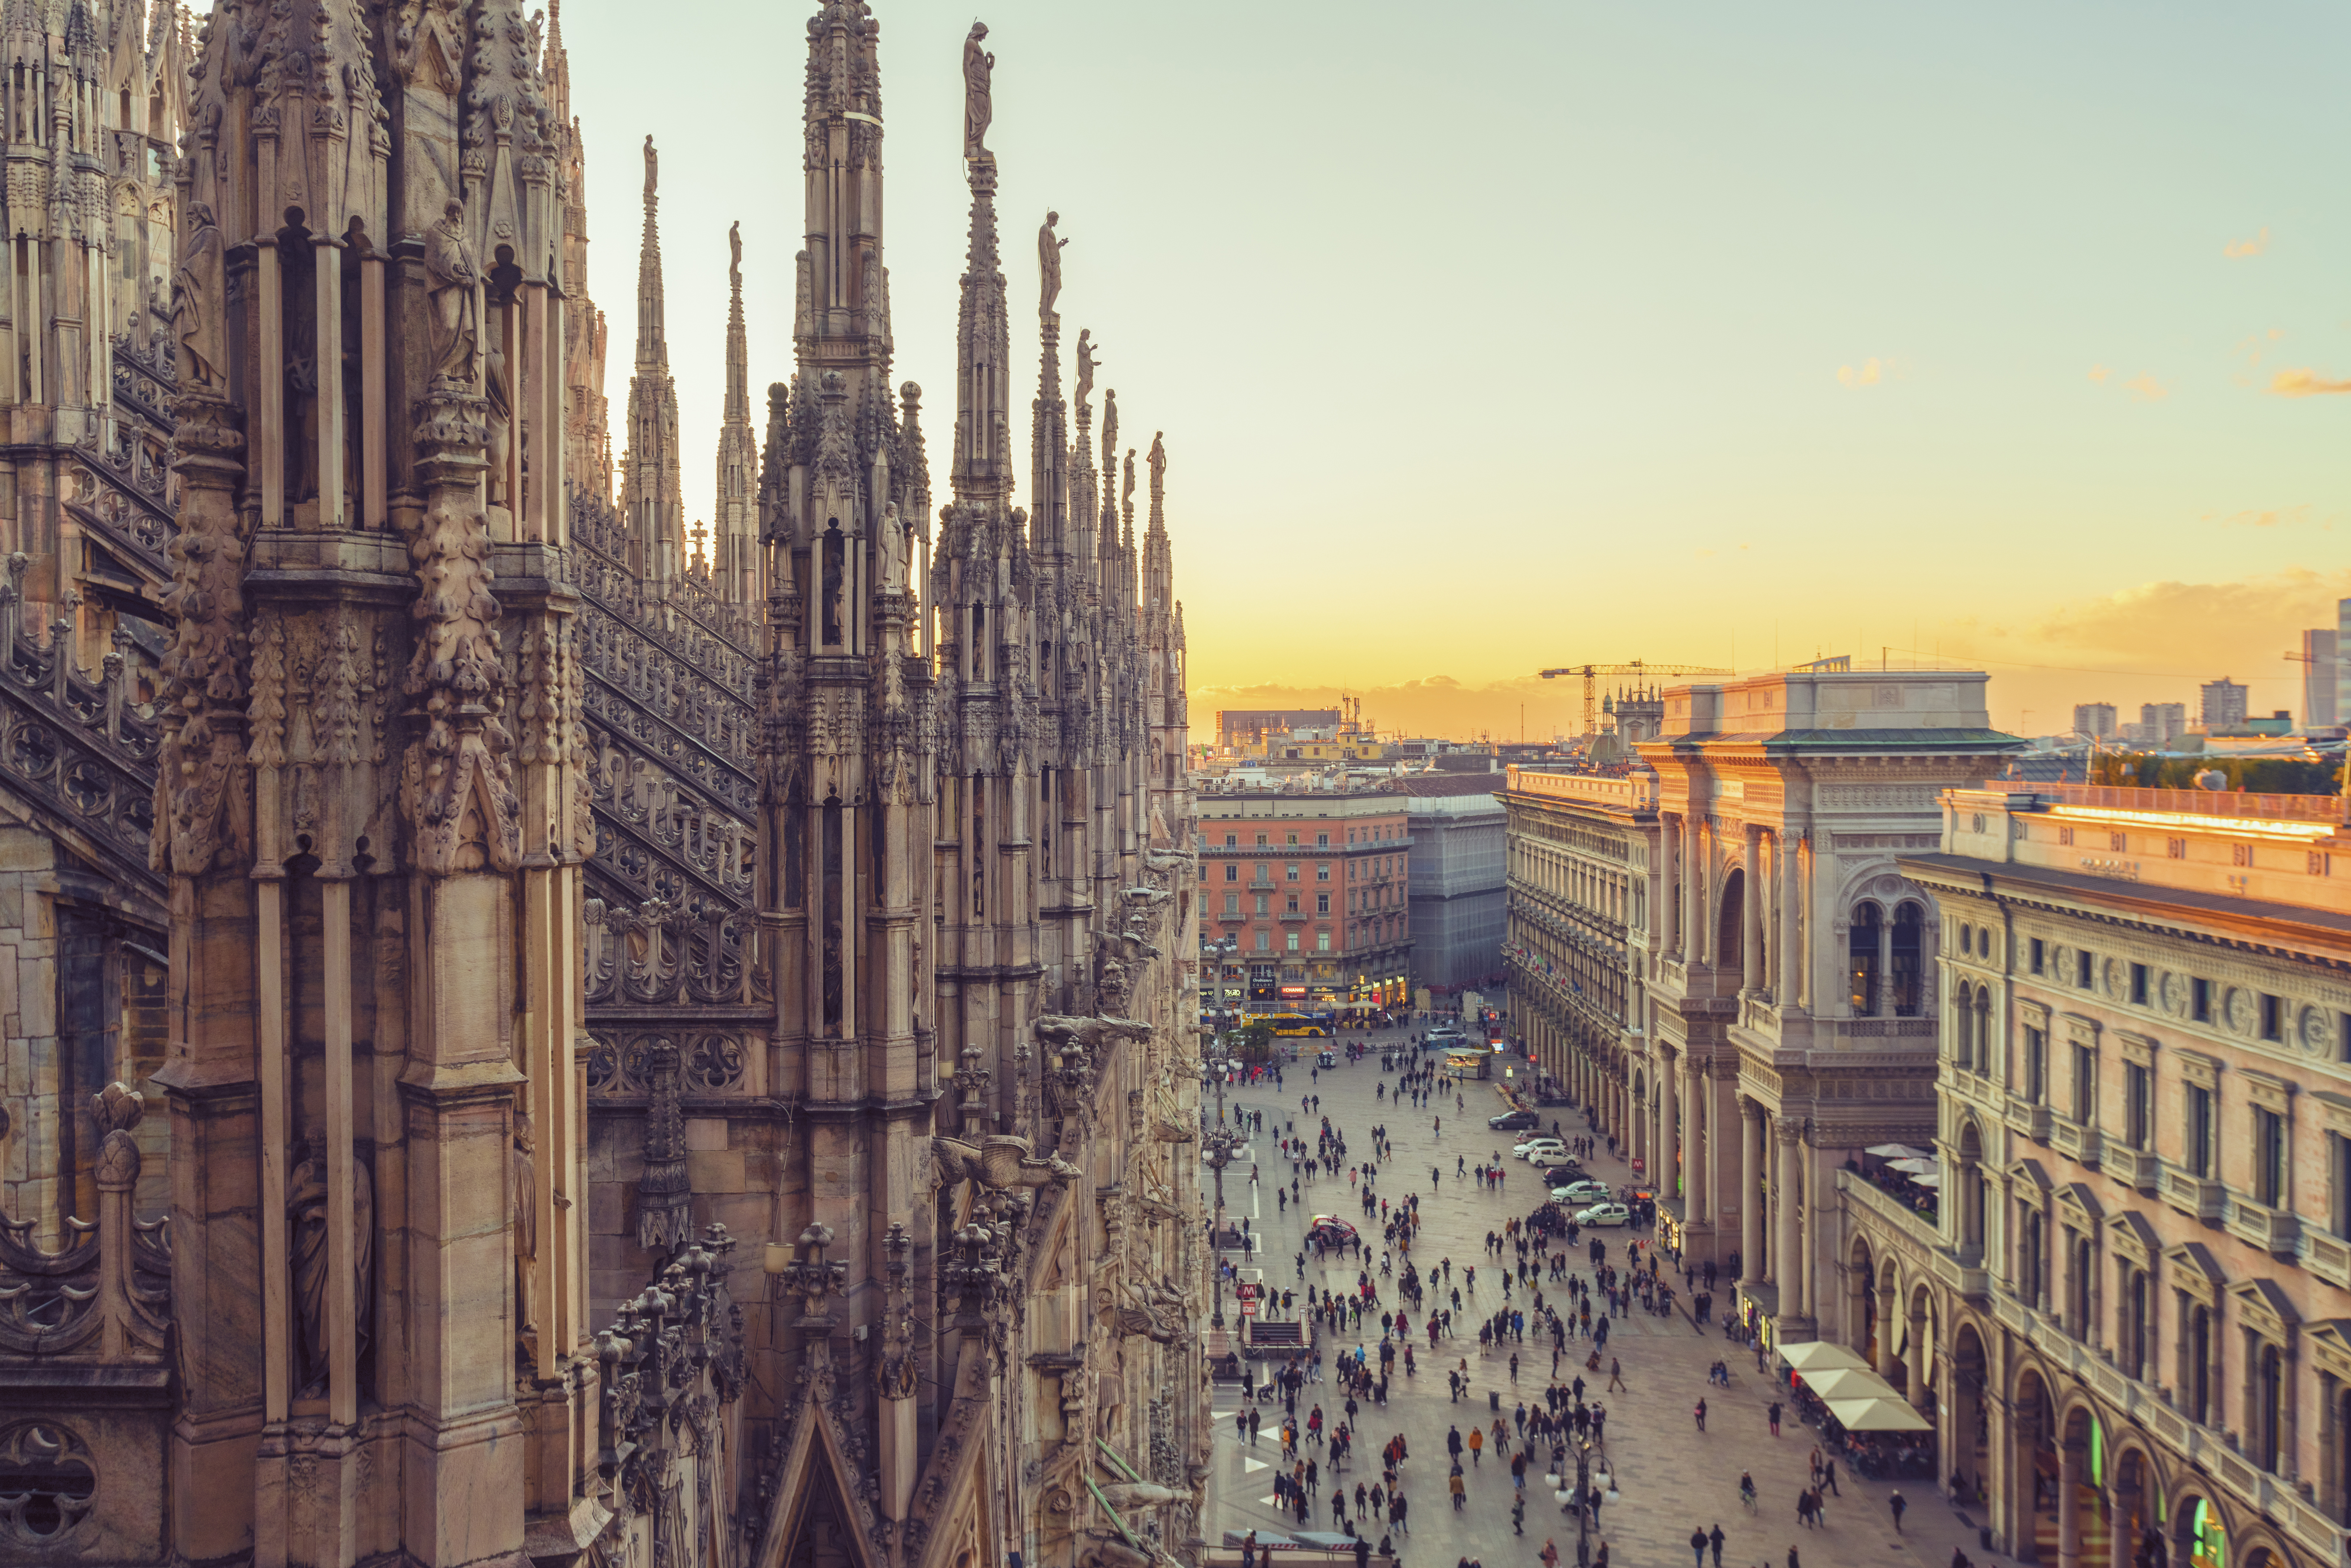 An aerial view of Milan, Italy. There is a building with ornate architecture in the foreground. Below there is a plaza with many people. Surrounding the plaza are various city buildings. 